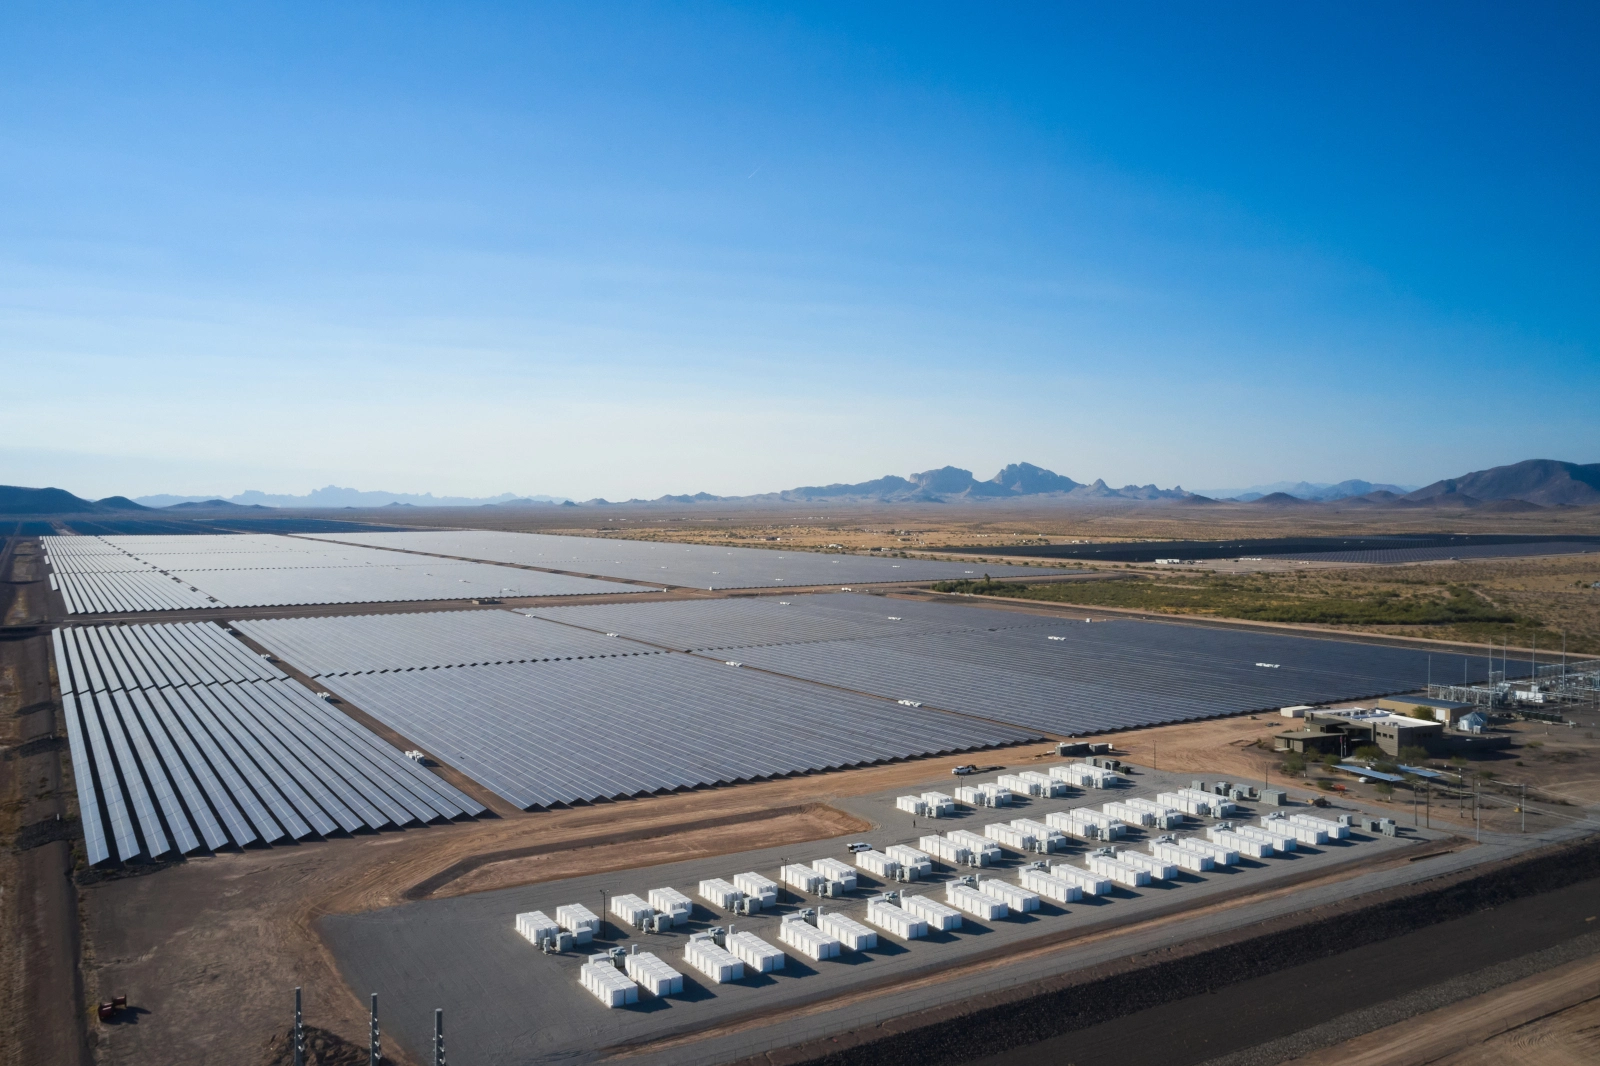 RWE Completes Three Large Battery Energy Storage Projects in USA